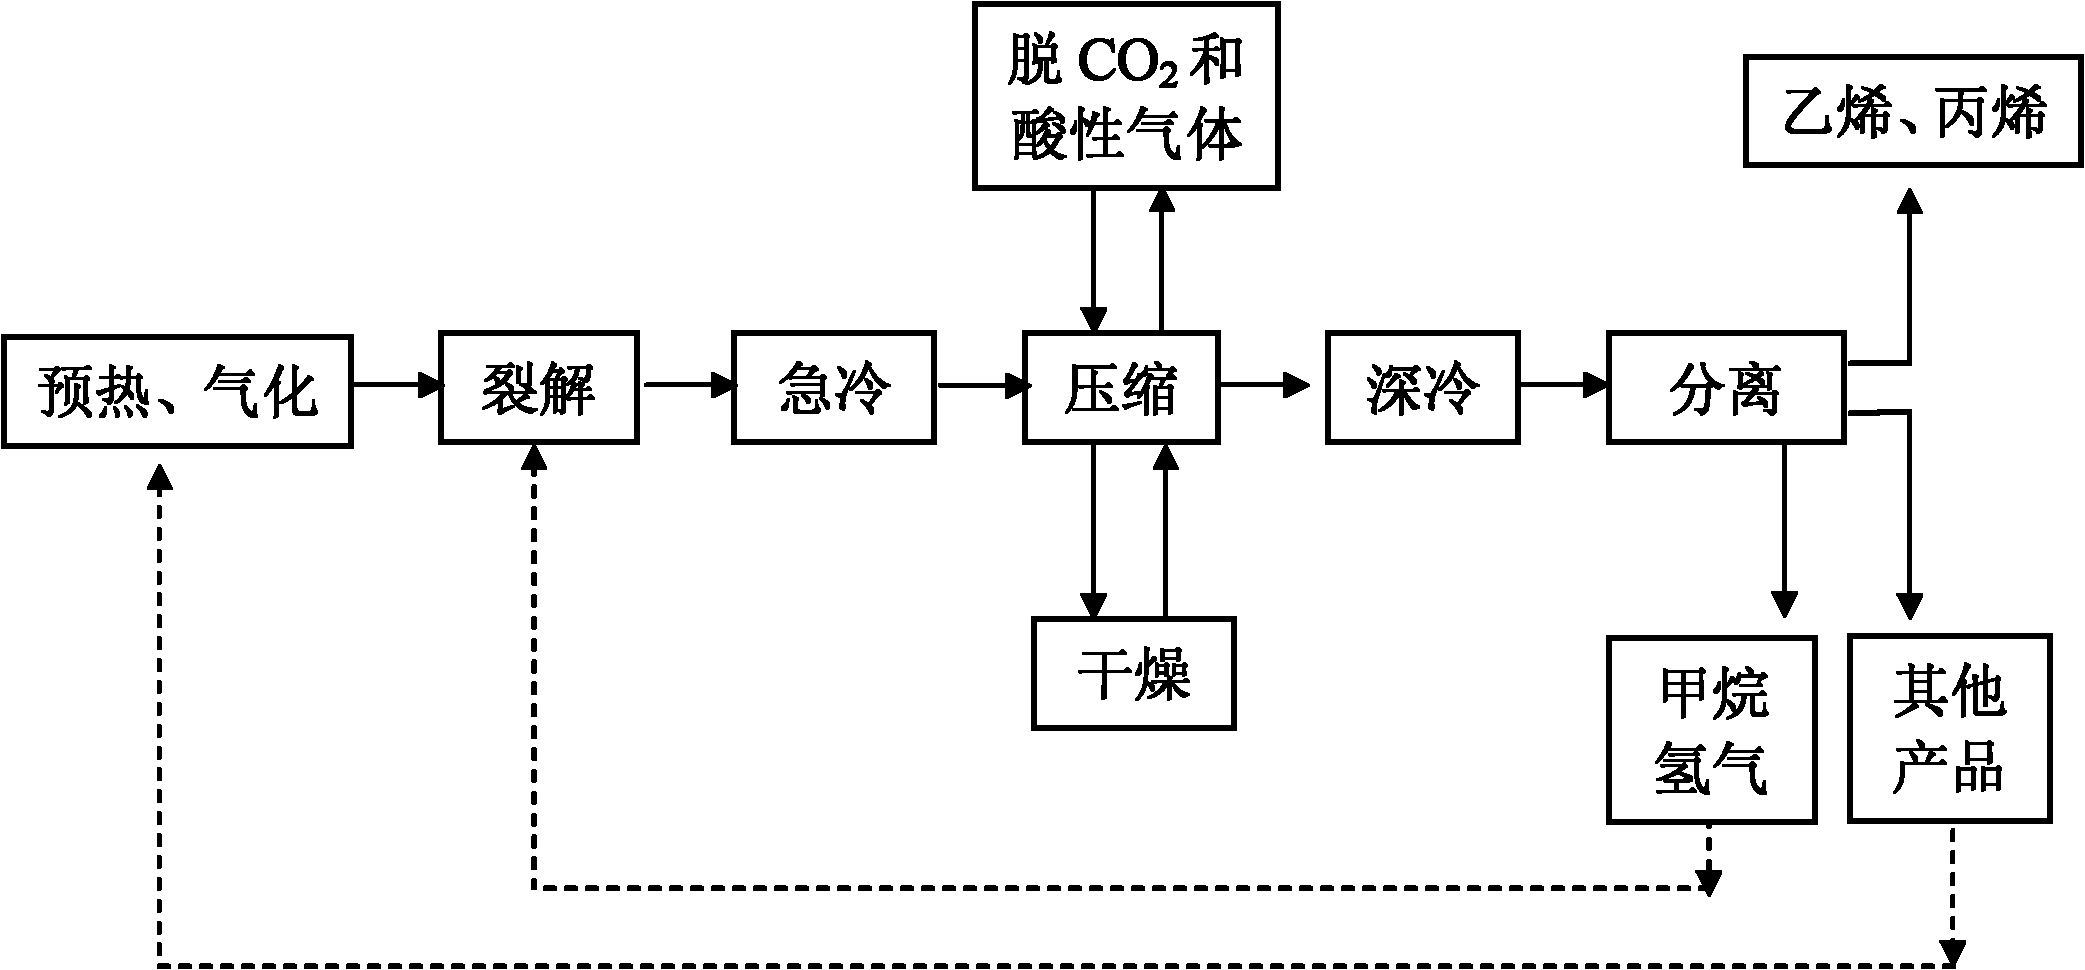 Equipment and method for preparing low-carbon olefins by cracking reactions